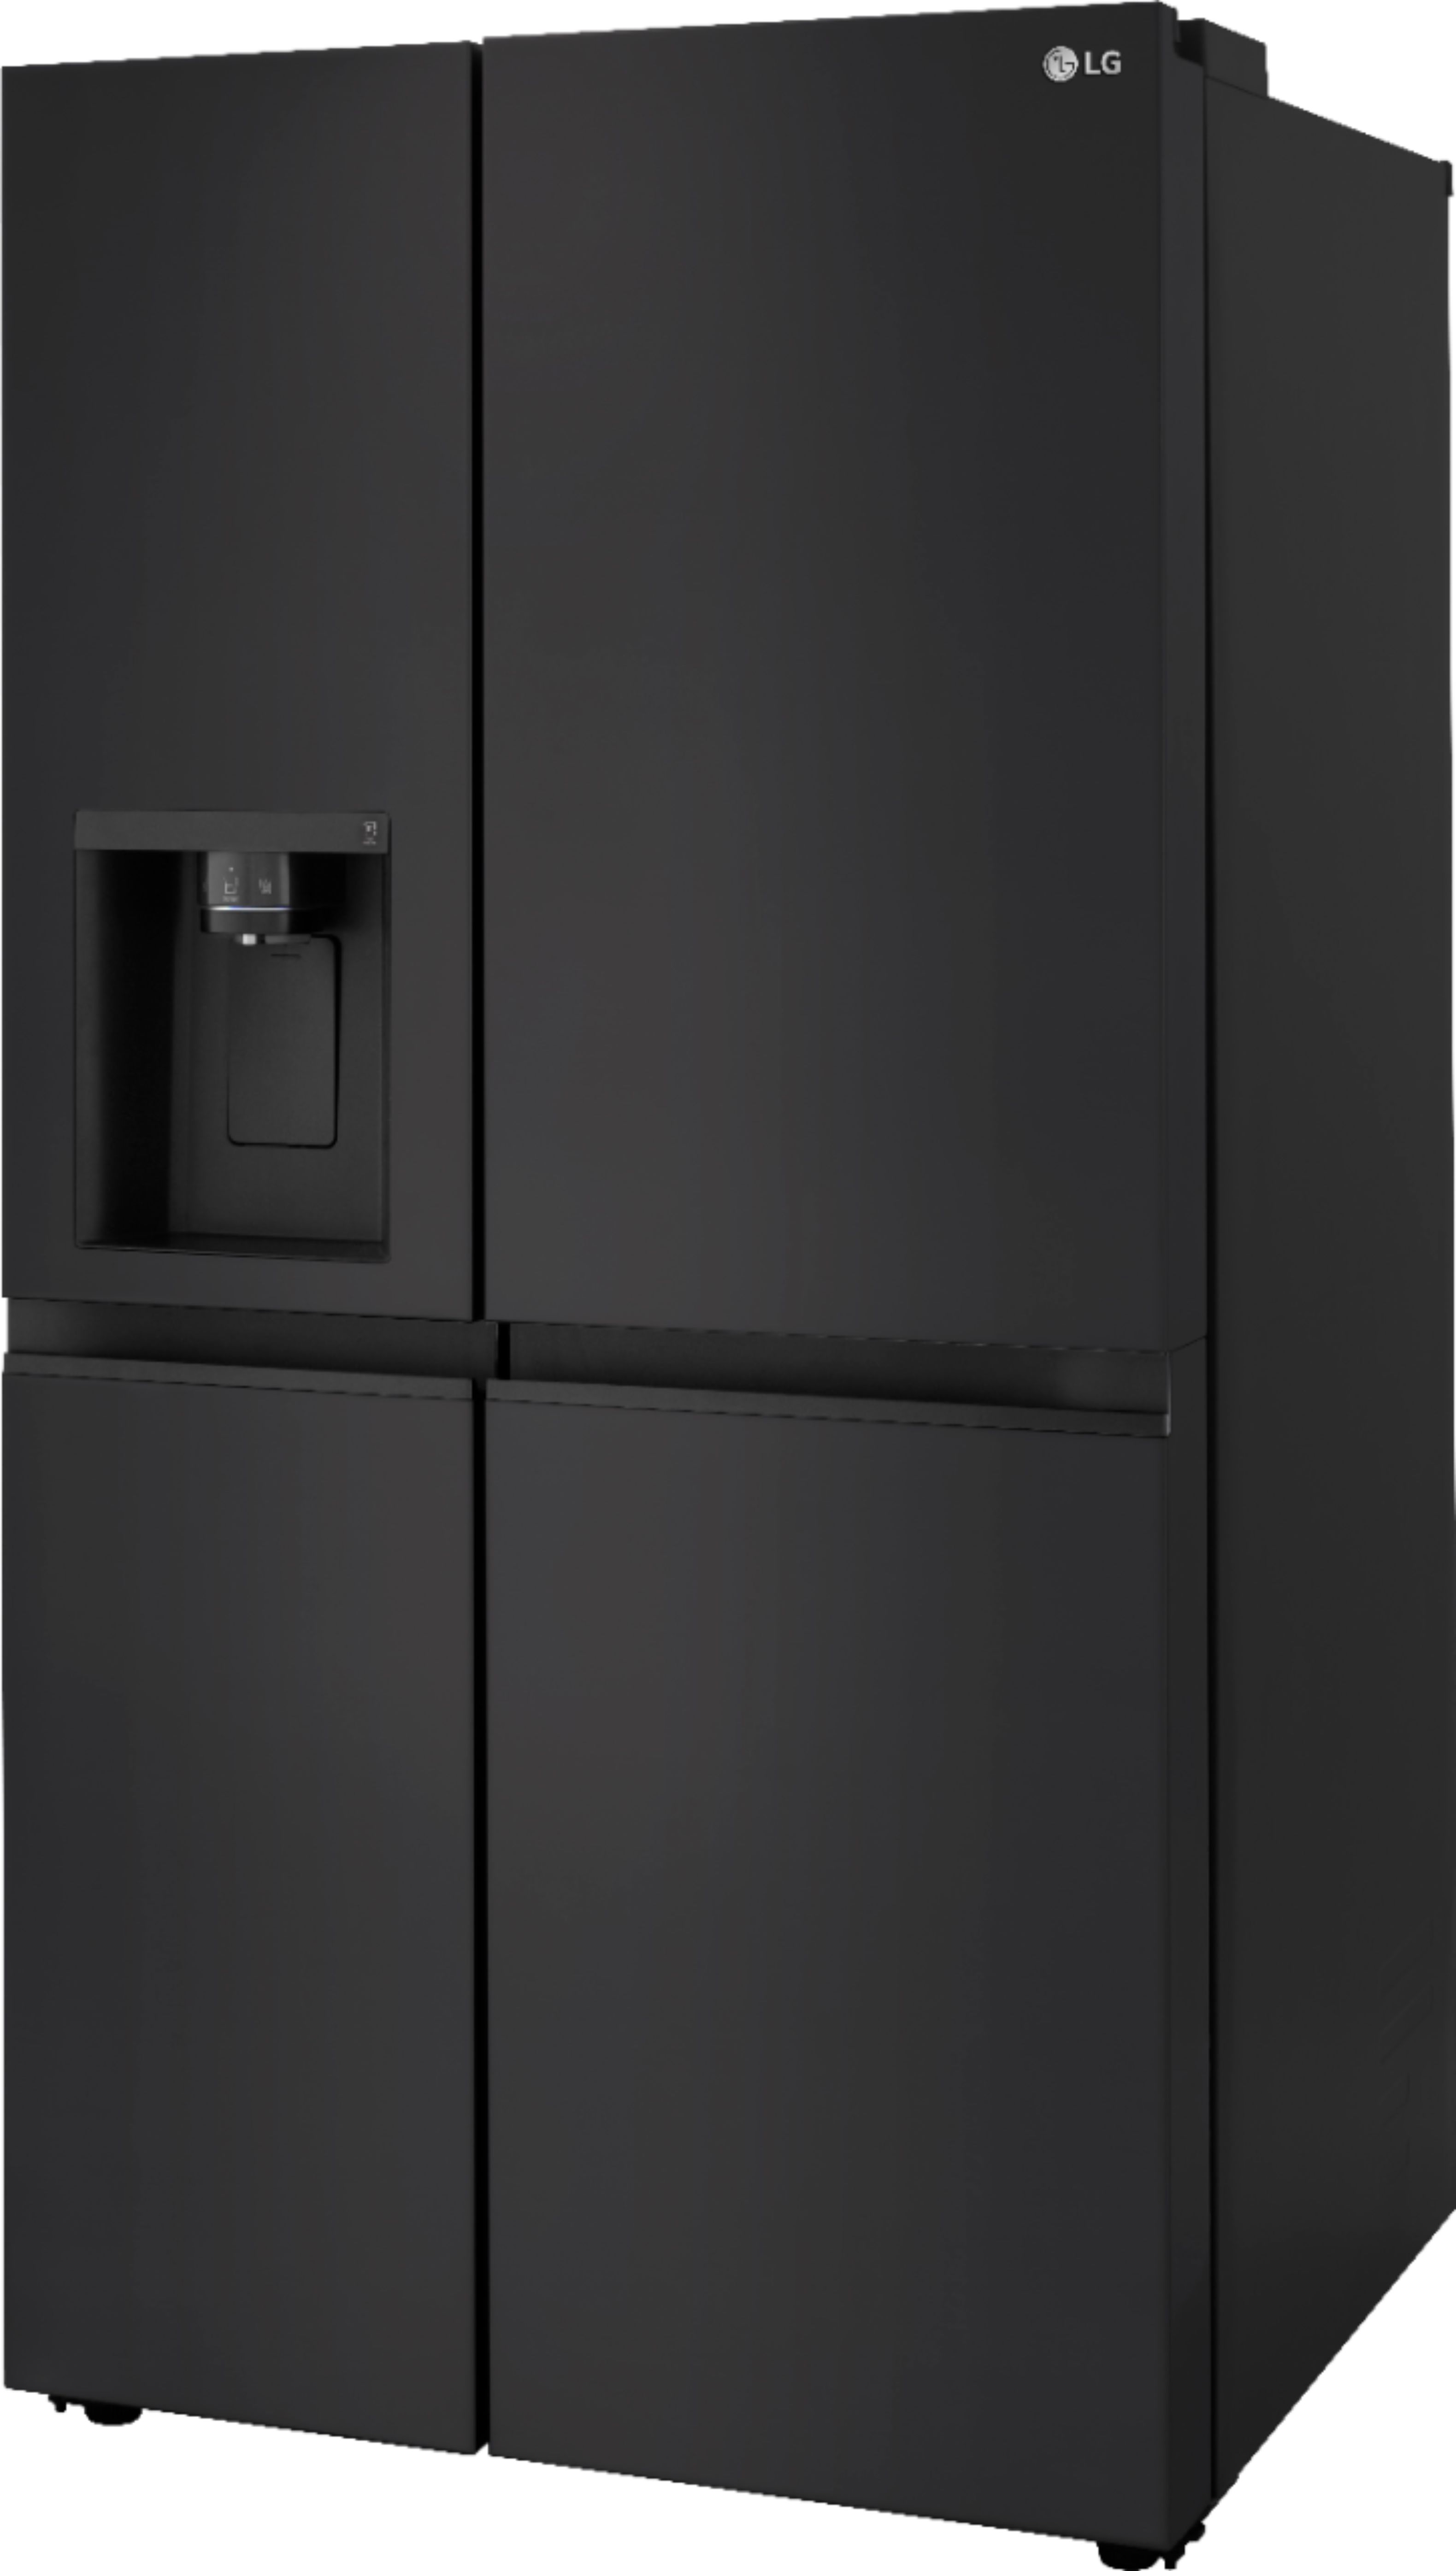 Angle View: LG - 27.2 Cu. Ft. Side-by-Side Refrigerator with SpacePlus Ice - Smooth Black